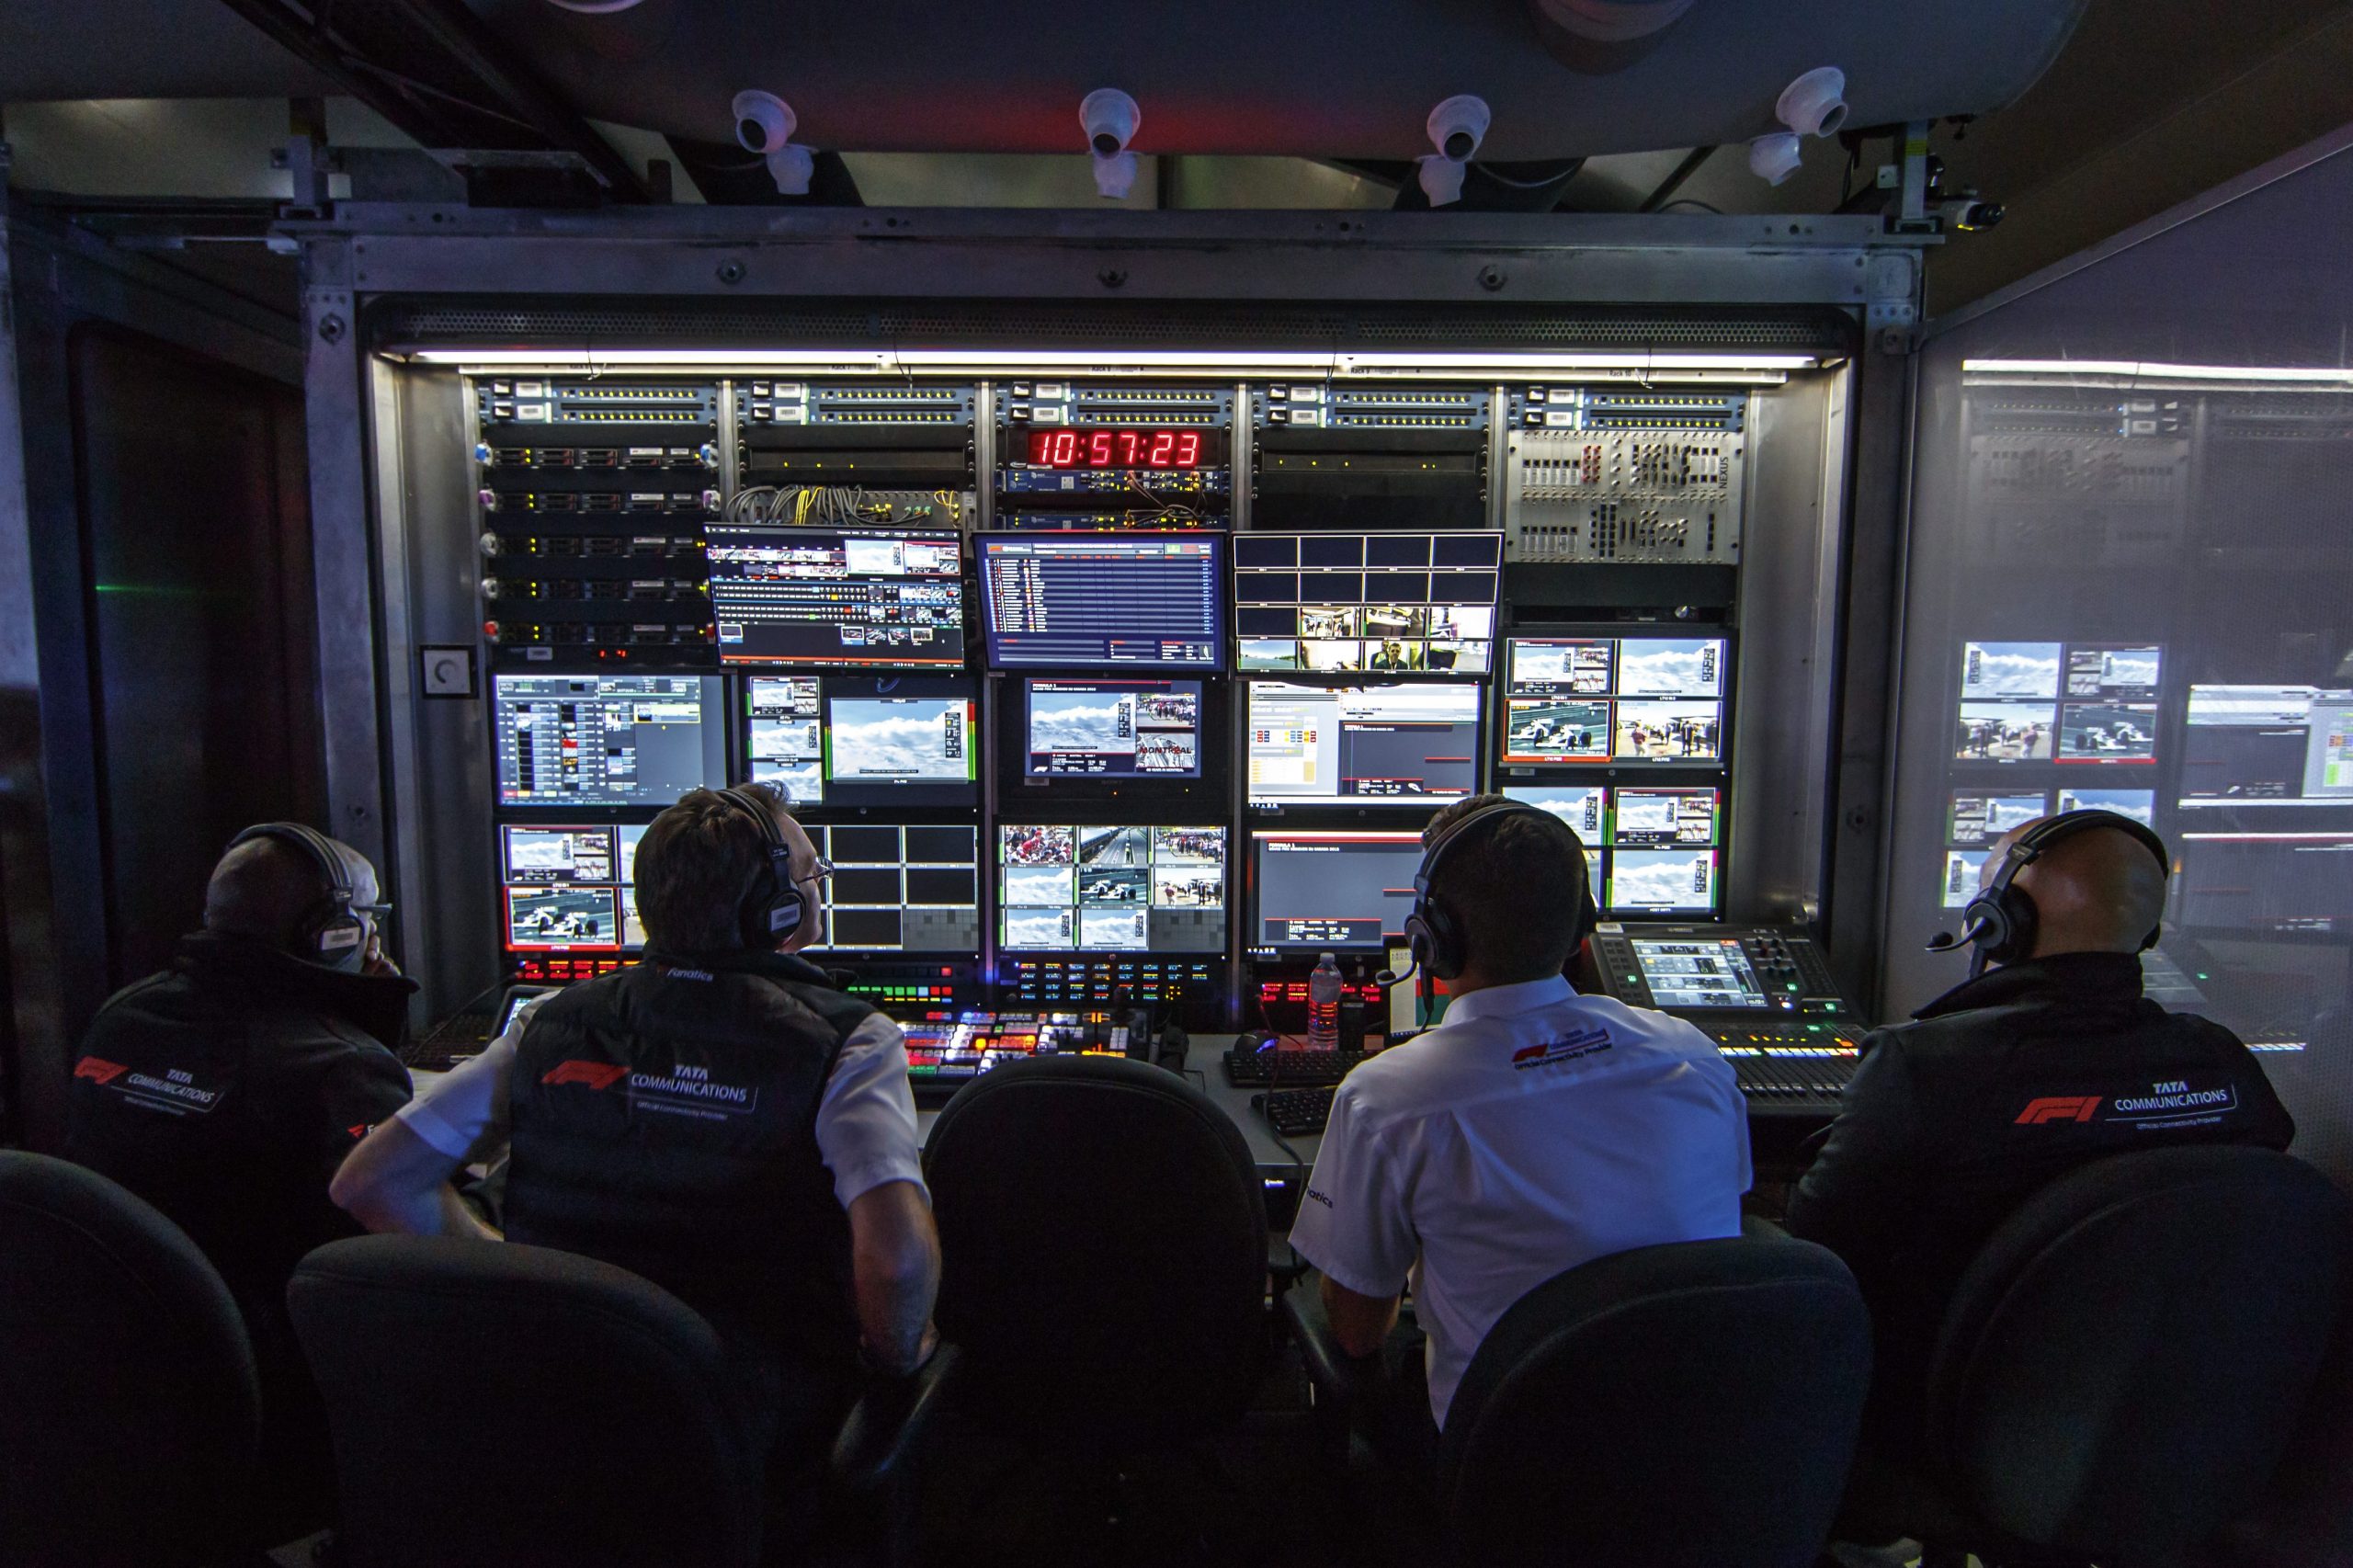 F1 steers future sustainable broadcasting with innovative Remote Operations Formula One World Championship Limited